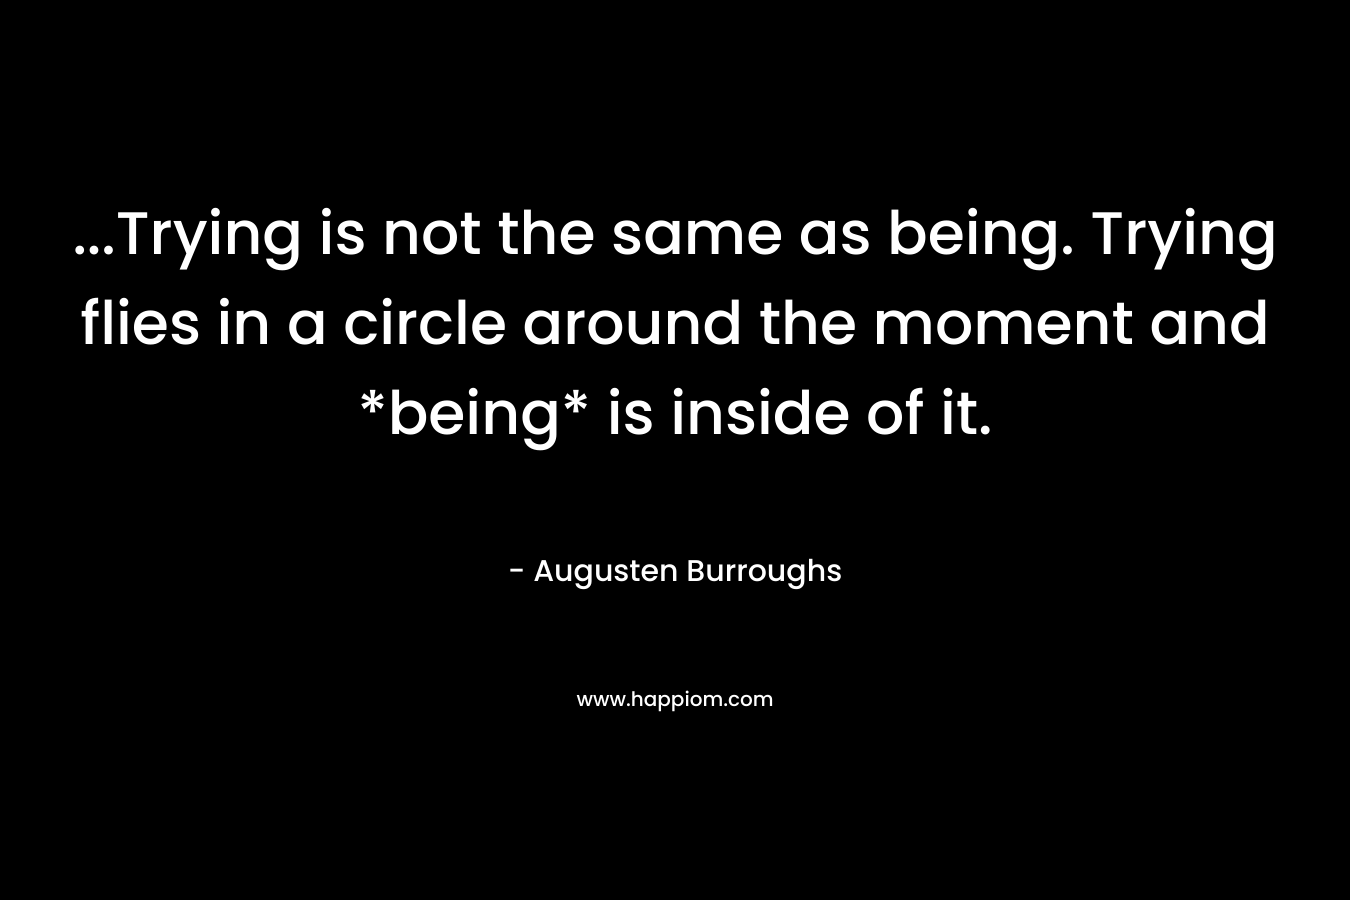 ...Trying is not the same as being. Trying flies in a circle around the moment and *being* is inside of it.